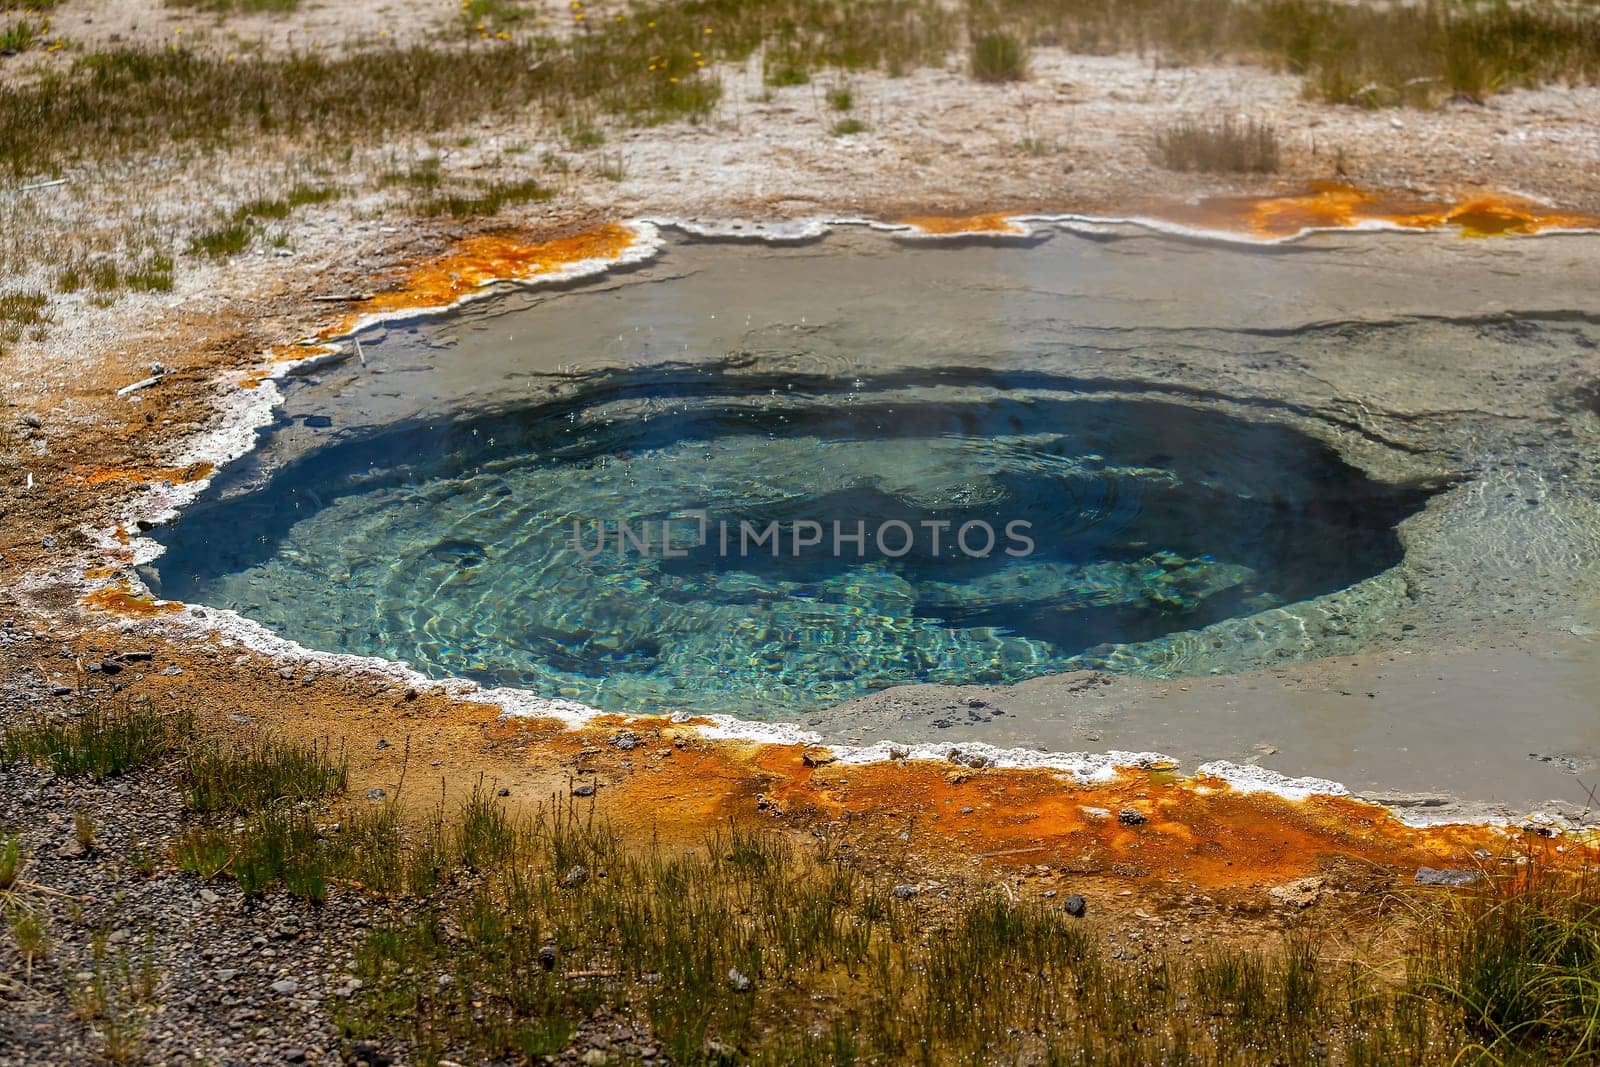  Hot spring in Yellow stone National Park in USA by f11photo